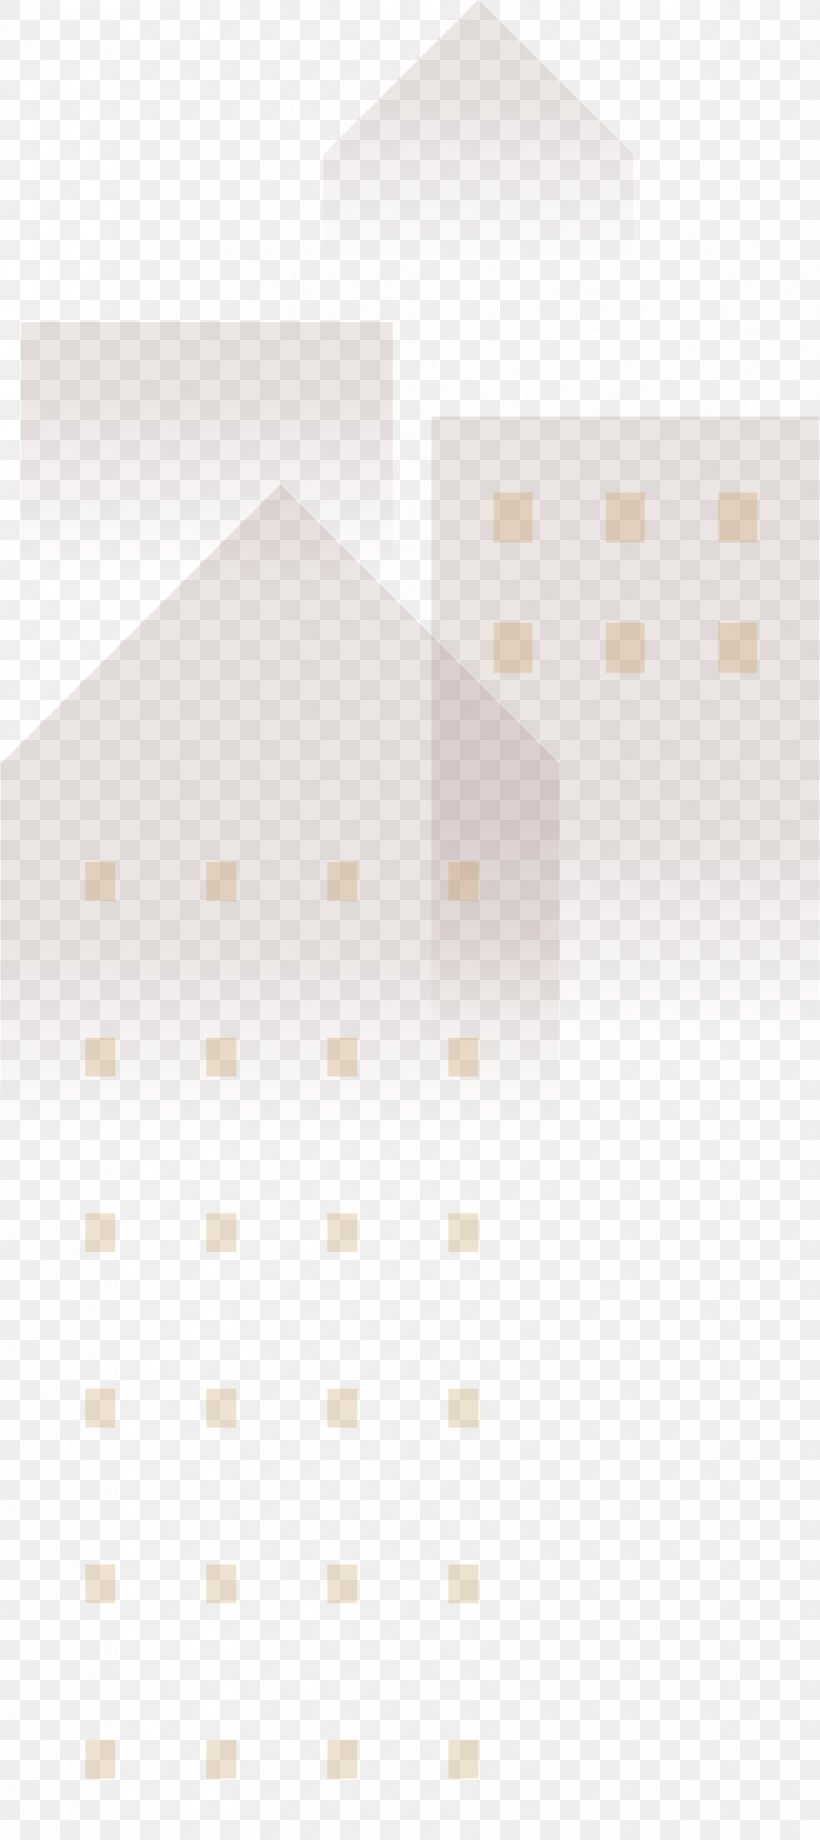 The Architecture Of The City Design Image Vector Graphics, PNG, 891x2000px, Architecture, Architecture Of The City, Beige, Chinese Architecture, Fotor Download Free